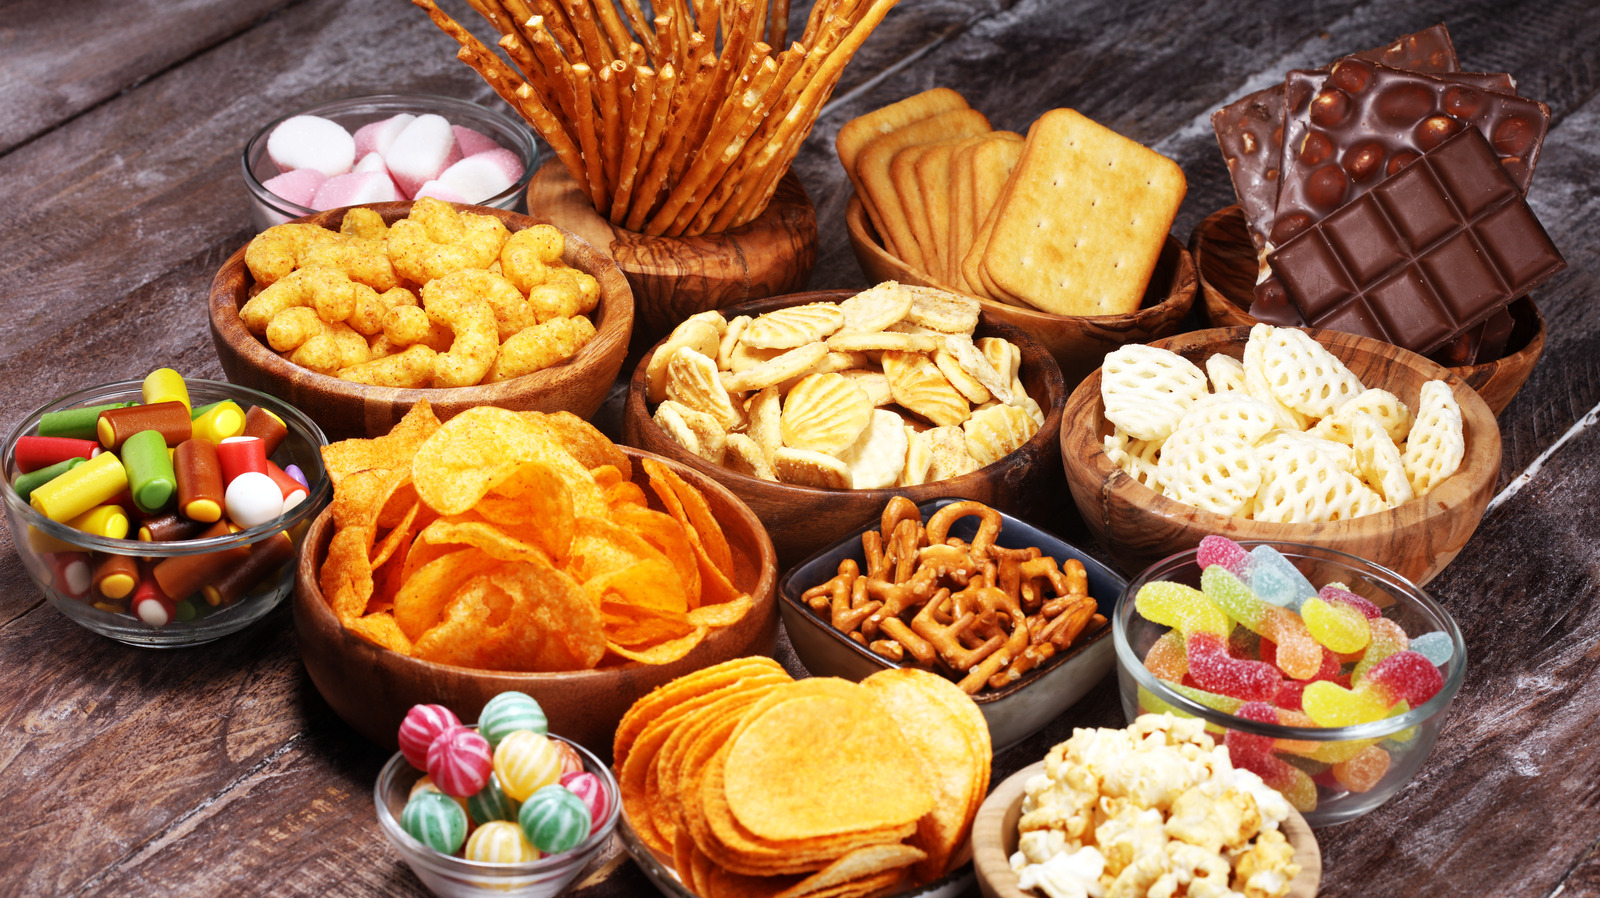 25 Most Popular Snacks In America Ranked Worst To Best